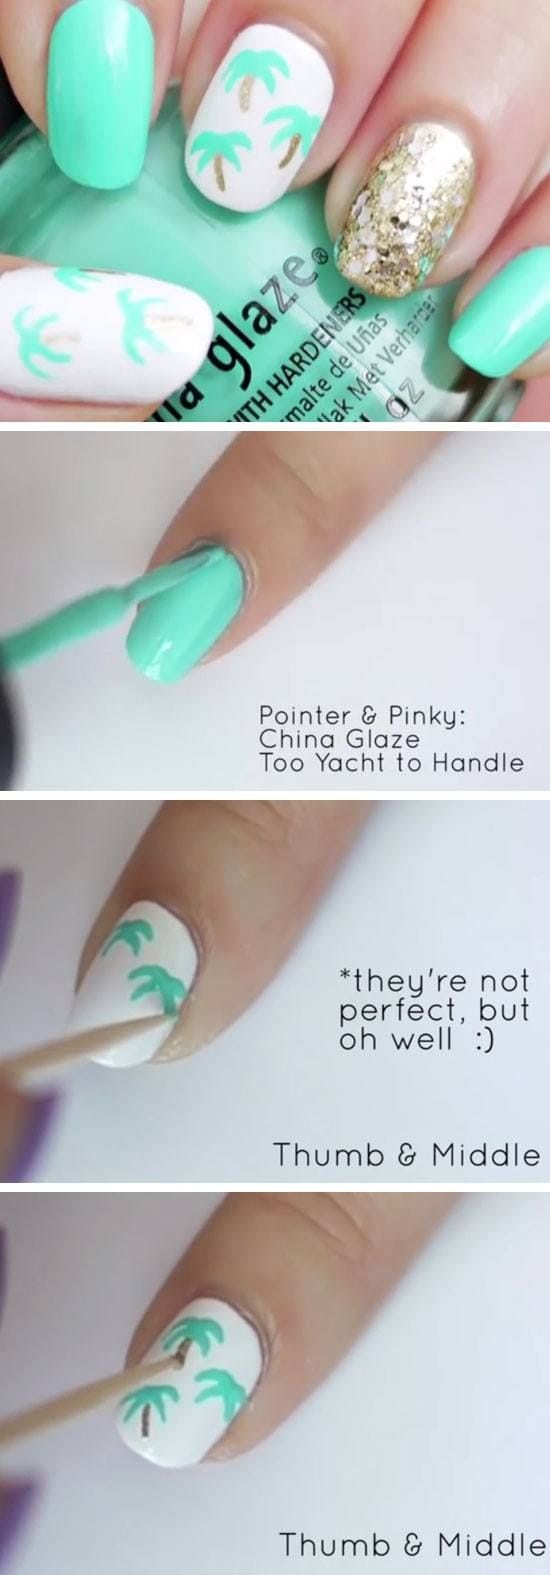 [ad_1]

Easy Palm Tree Nail Art | 18 Easy Summer Nails Designs for Summer | Cute Nail Art Ideas for Teens
Source by qh75
[ad_2]
			
			…